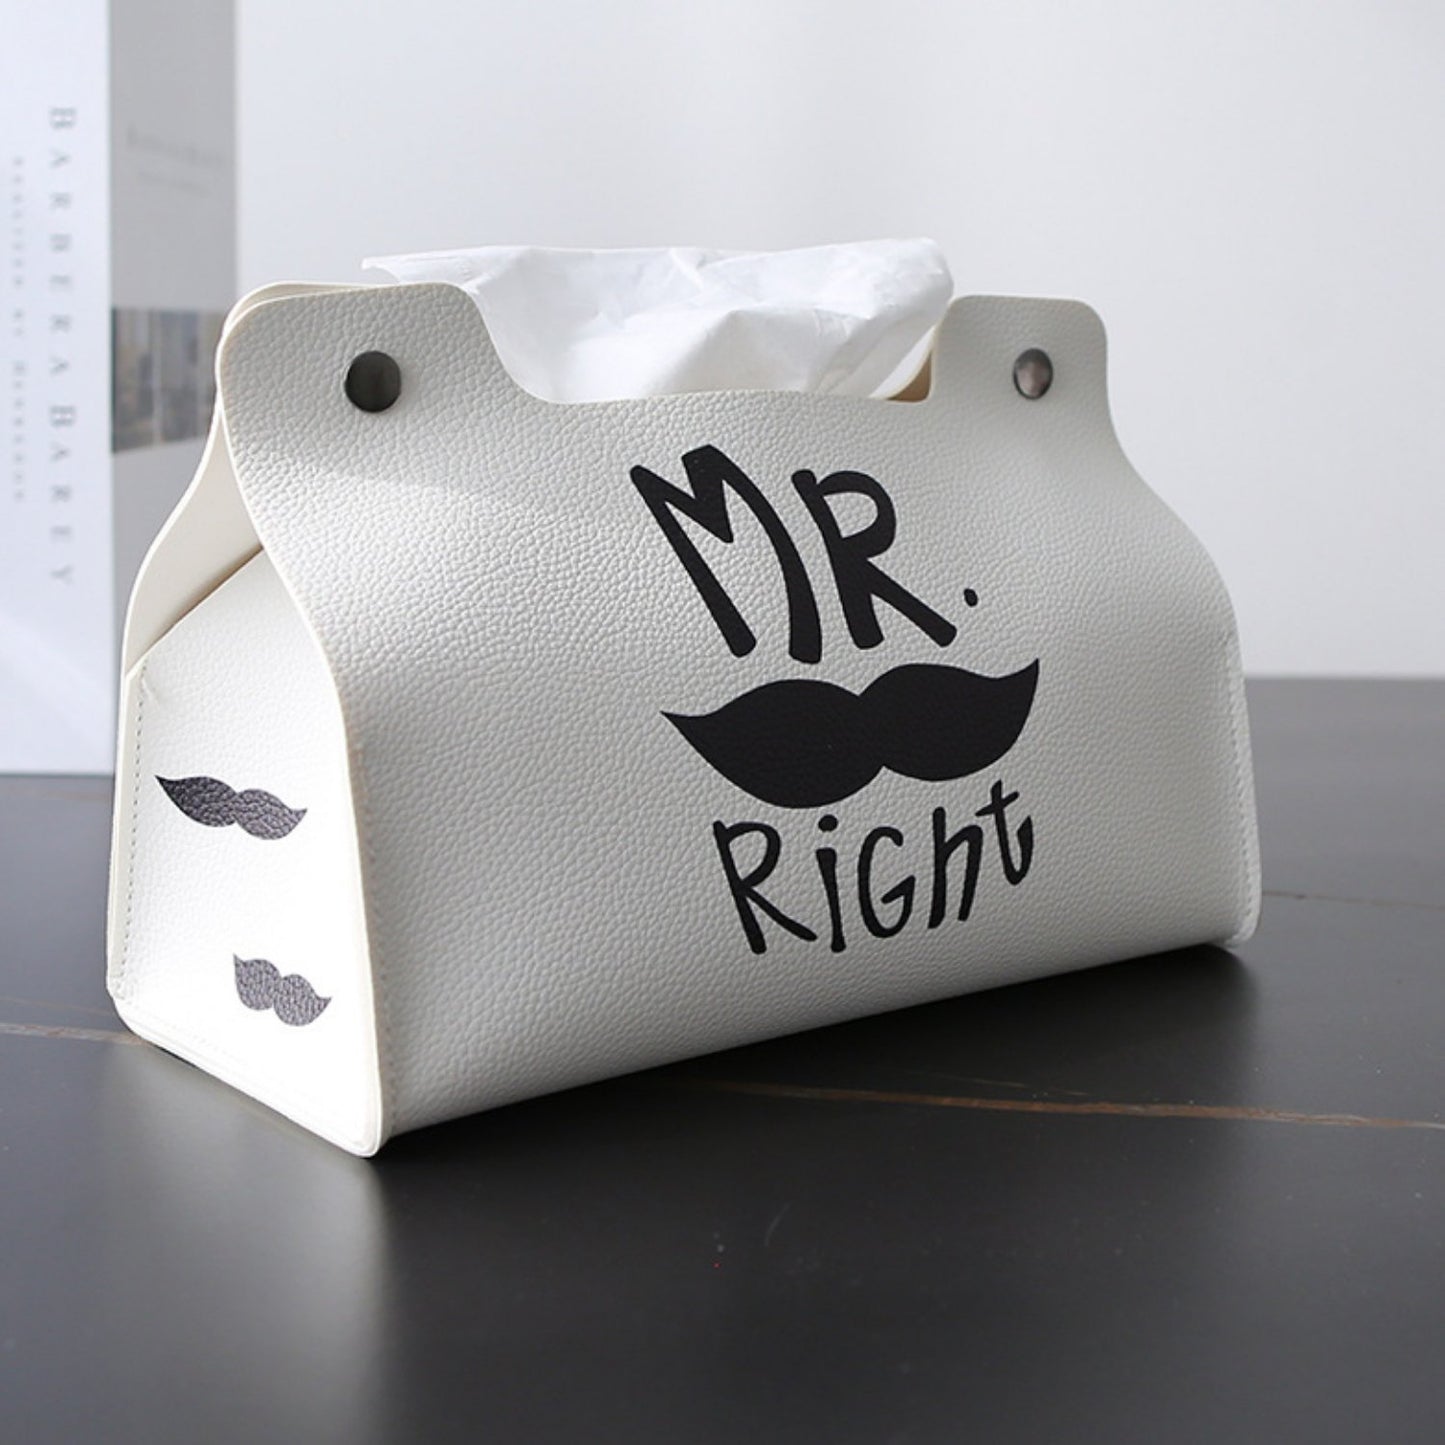 MR. & MRS. Right Tissue Boxes - BloomBliss.com